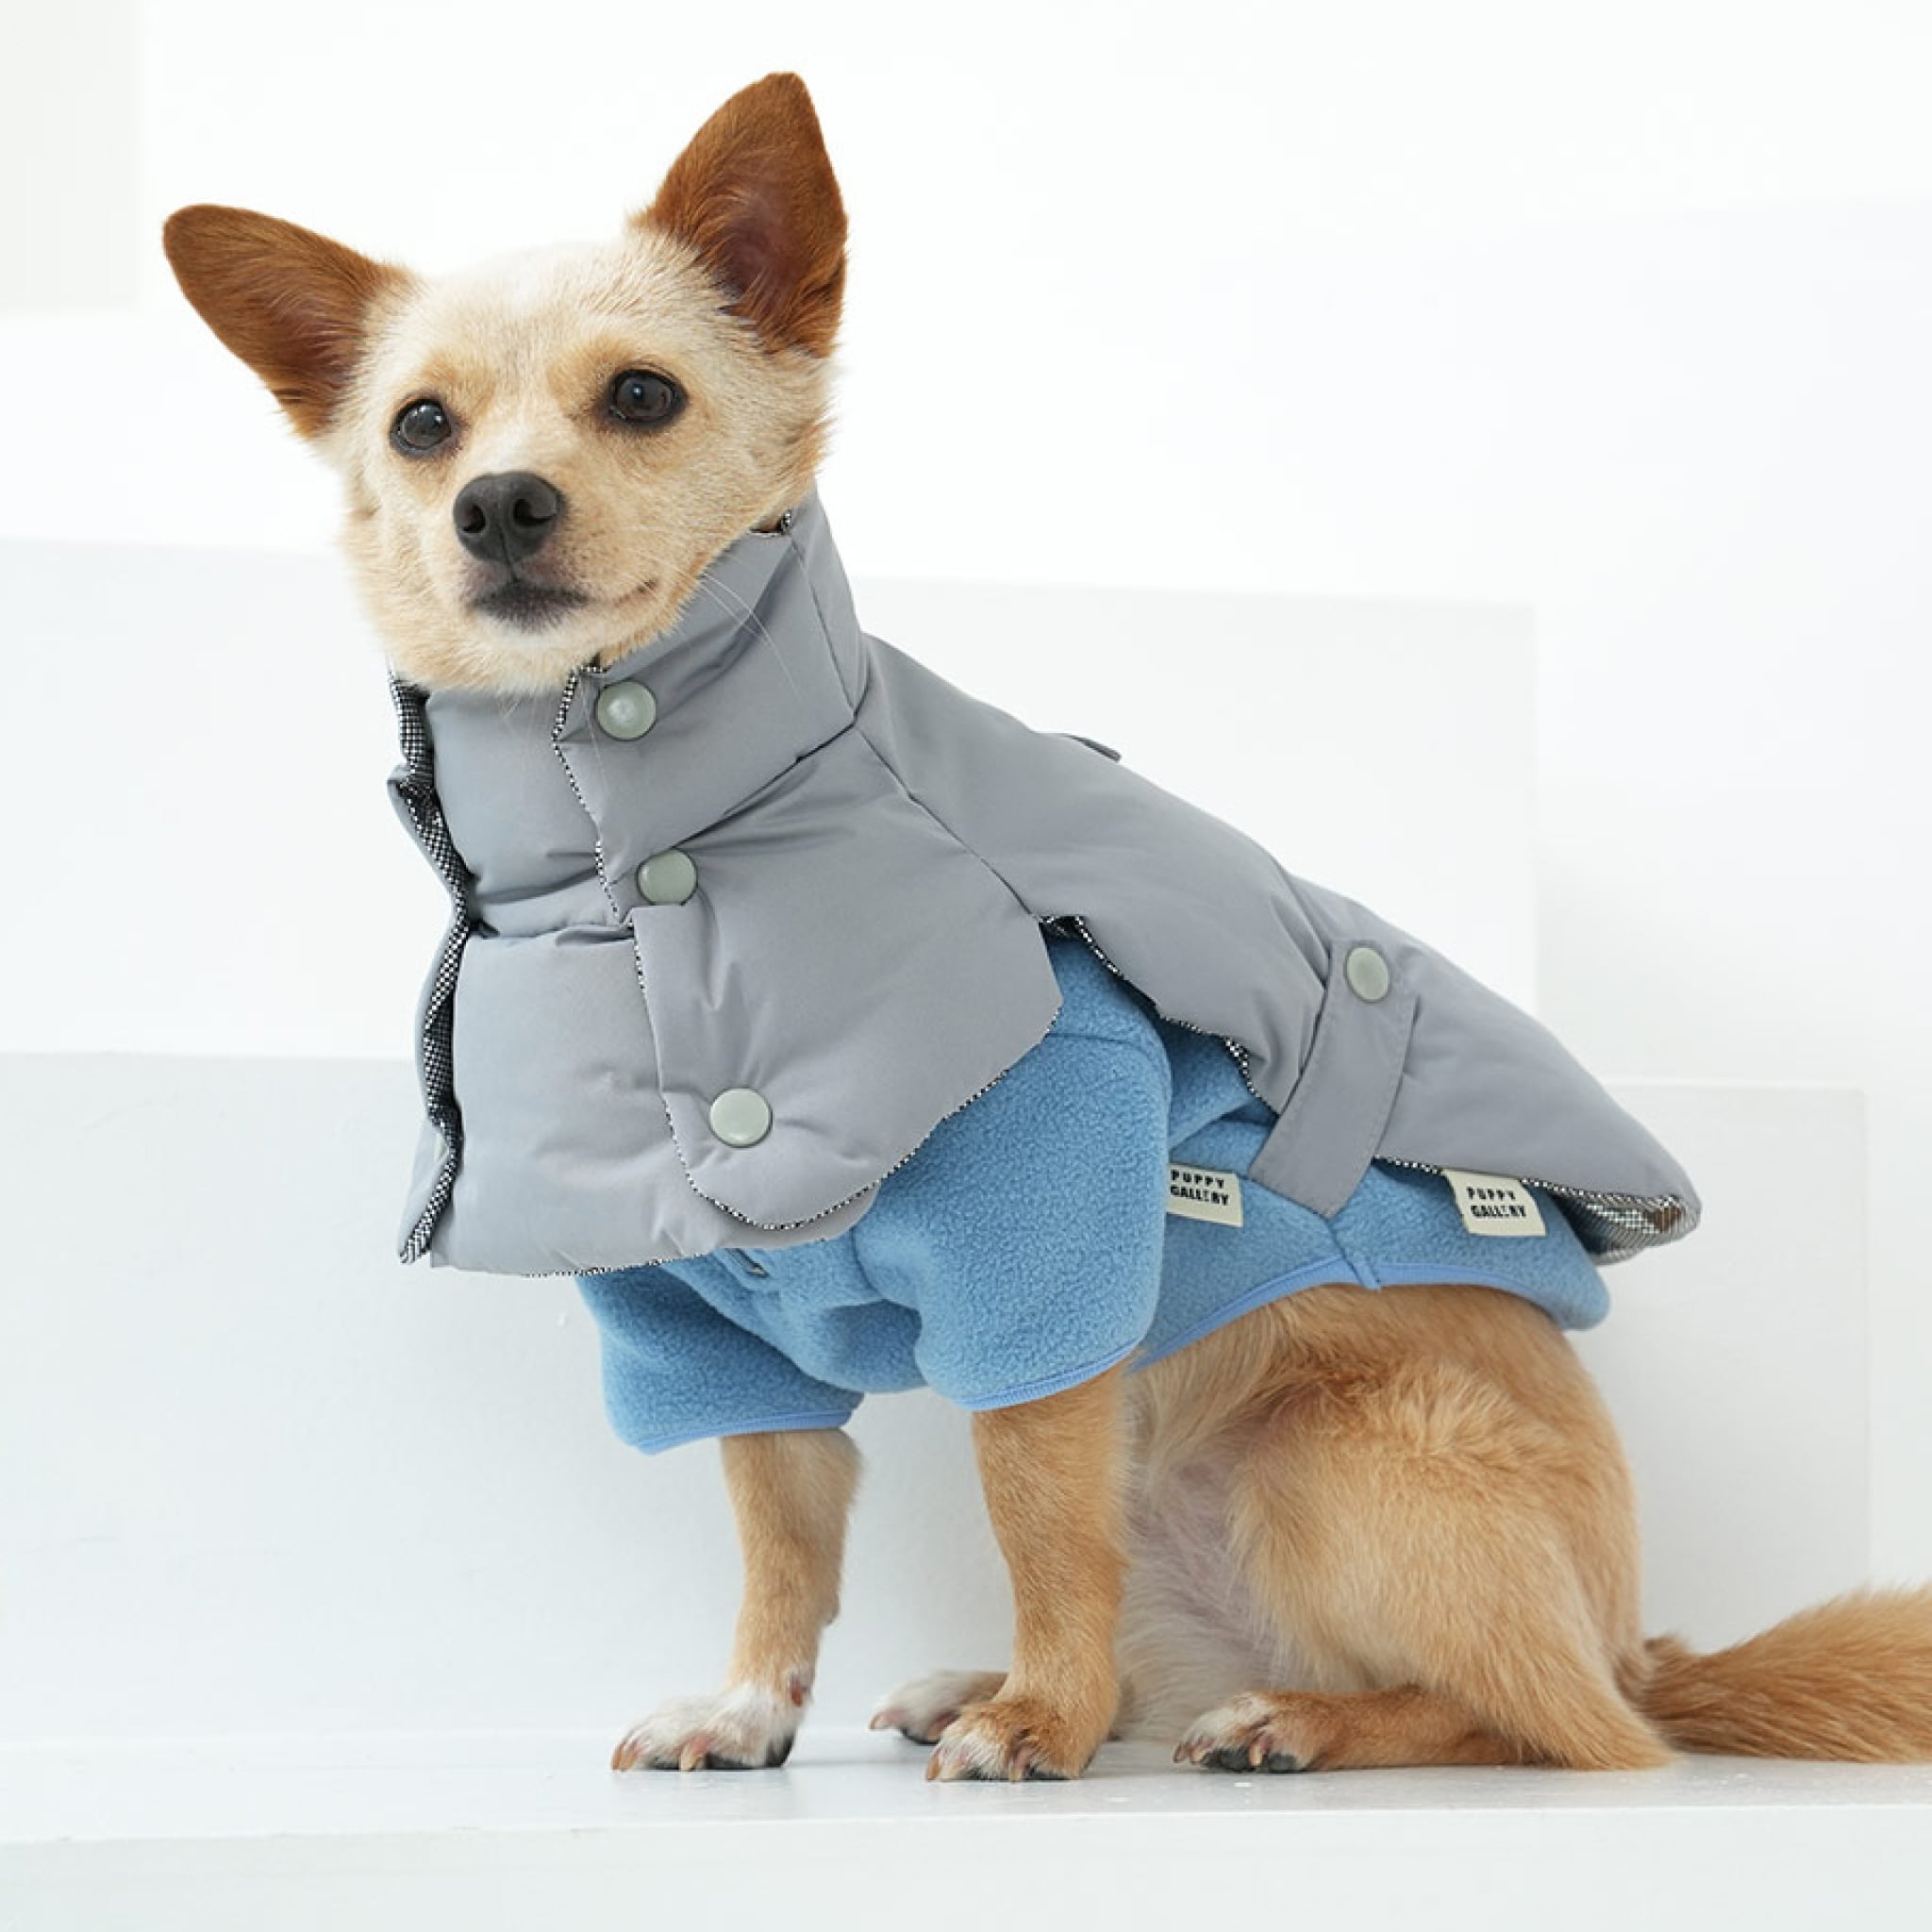 Dog wearing the fleece neck warmer padded jacket set in grey and blue